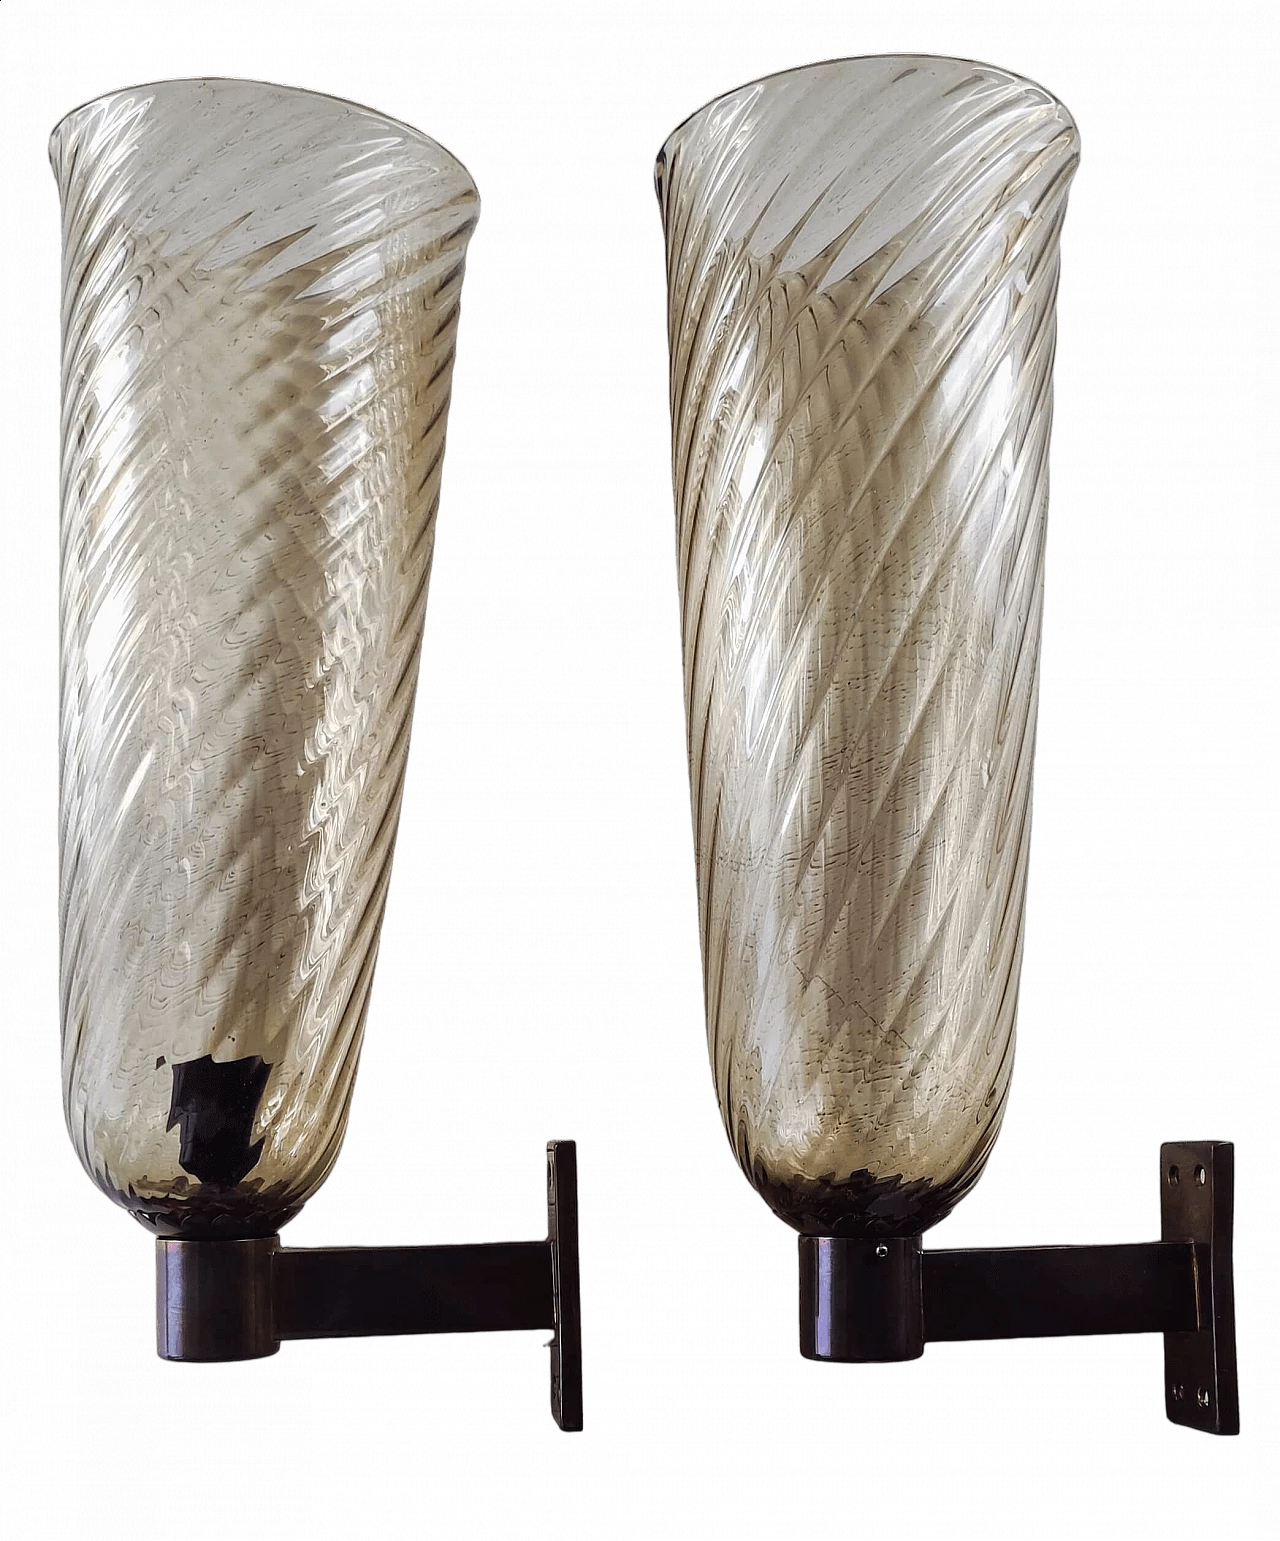 Pair of Art Deco Murano glass and brass wall sconces, 1920s 20